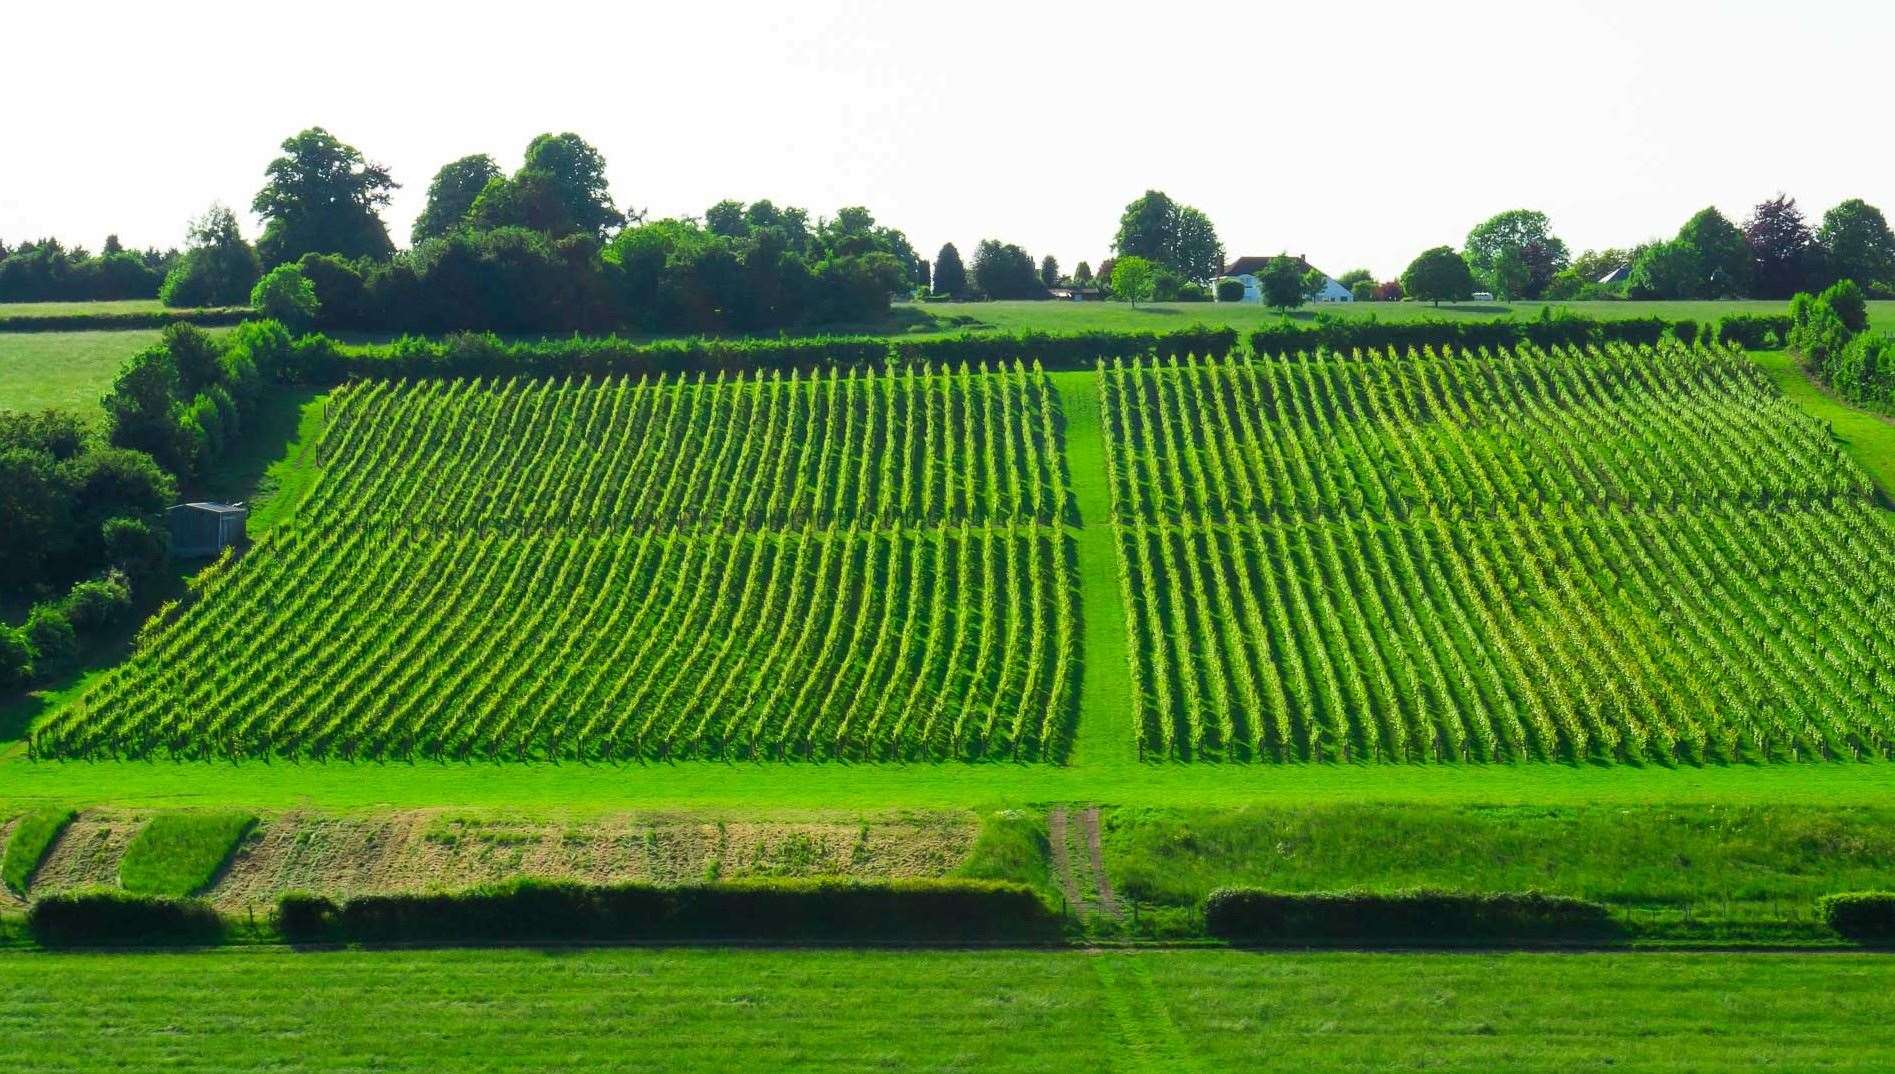 Meopham Valley Vineyard is on Kent's North Downs. Photo: Surinder Bassi